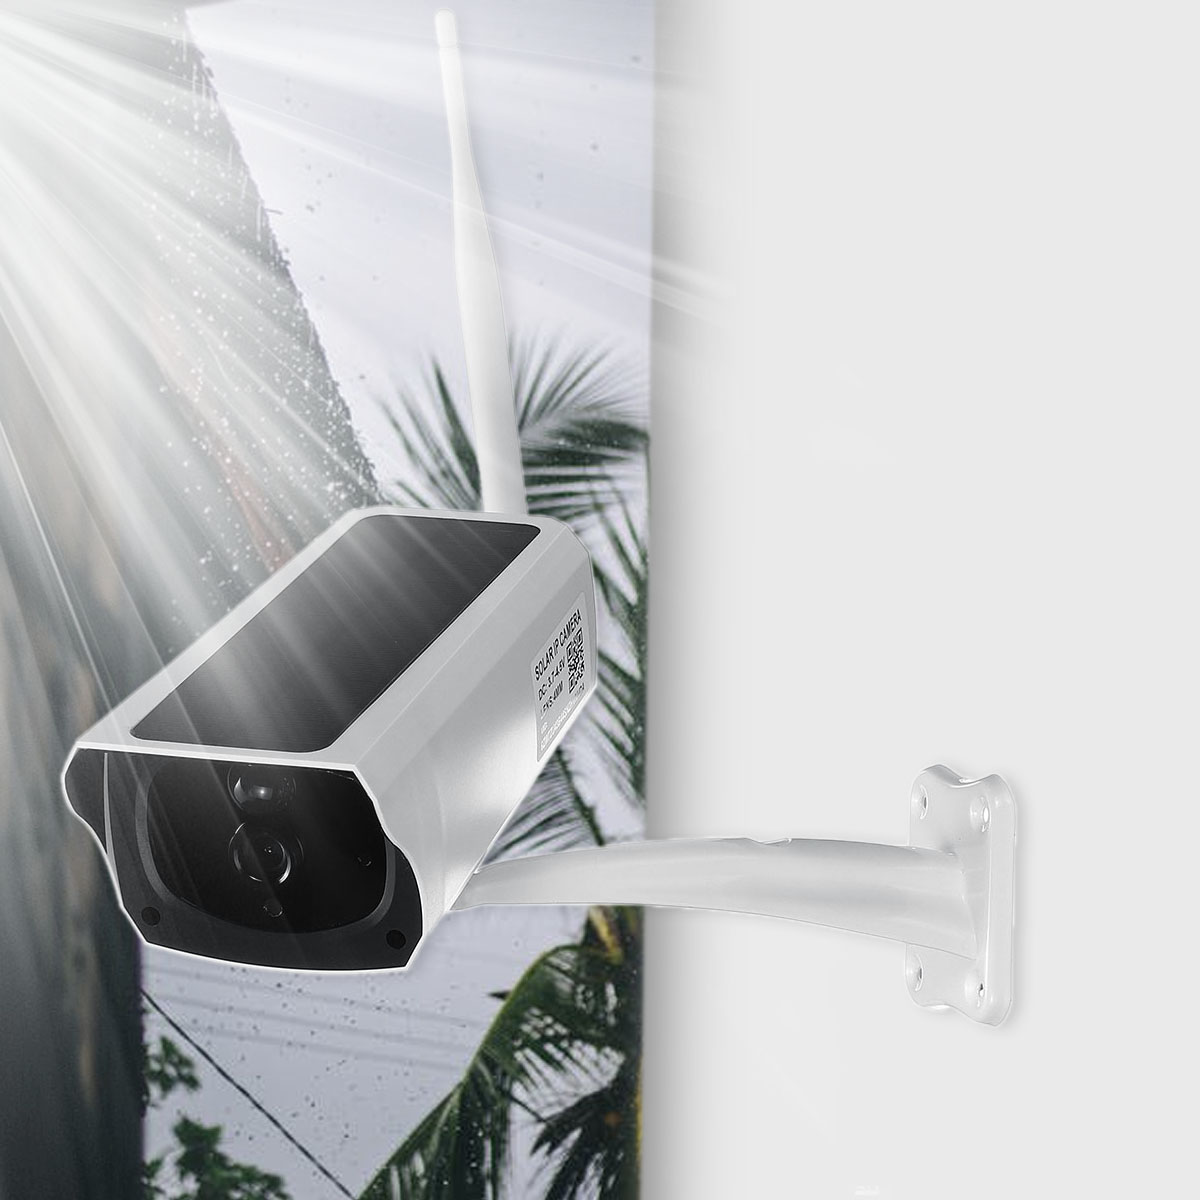 HD-1080P-Solar-Powered-Wireless-WiFi-IP-Camera-Outdoor-Security-Home-CCTV-Camera-with-64G-Memory-Car-1725765